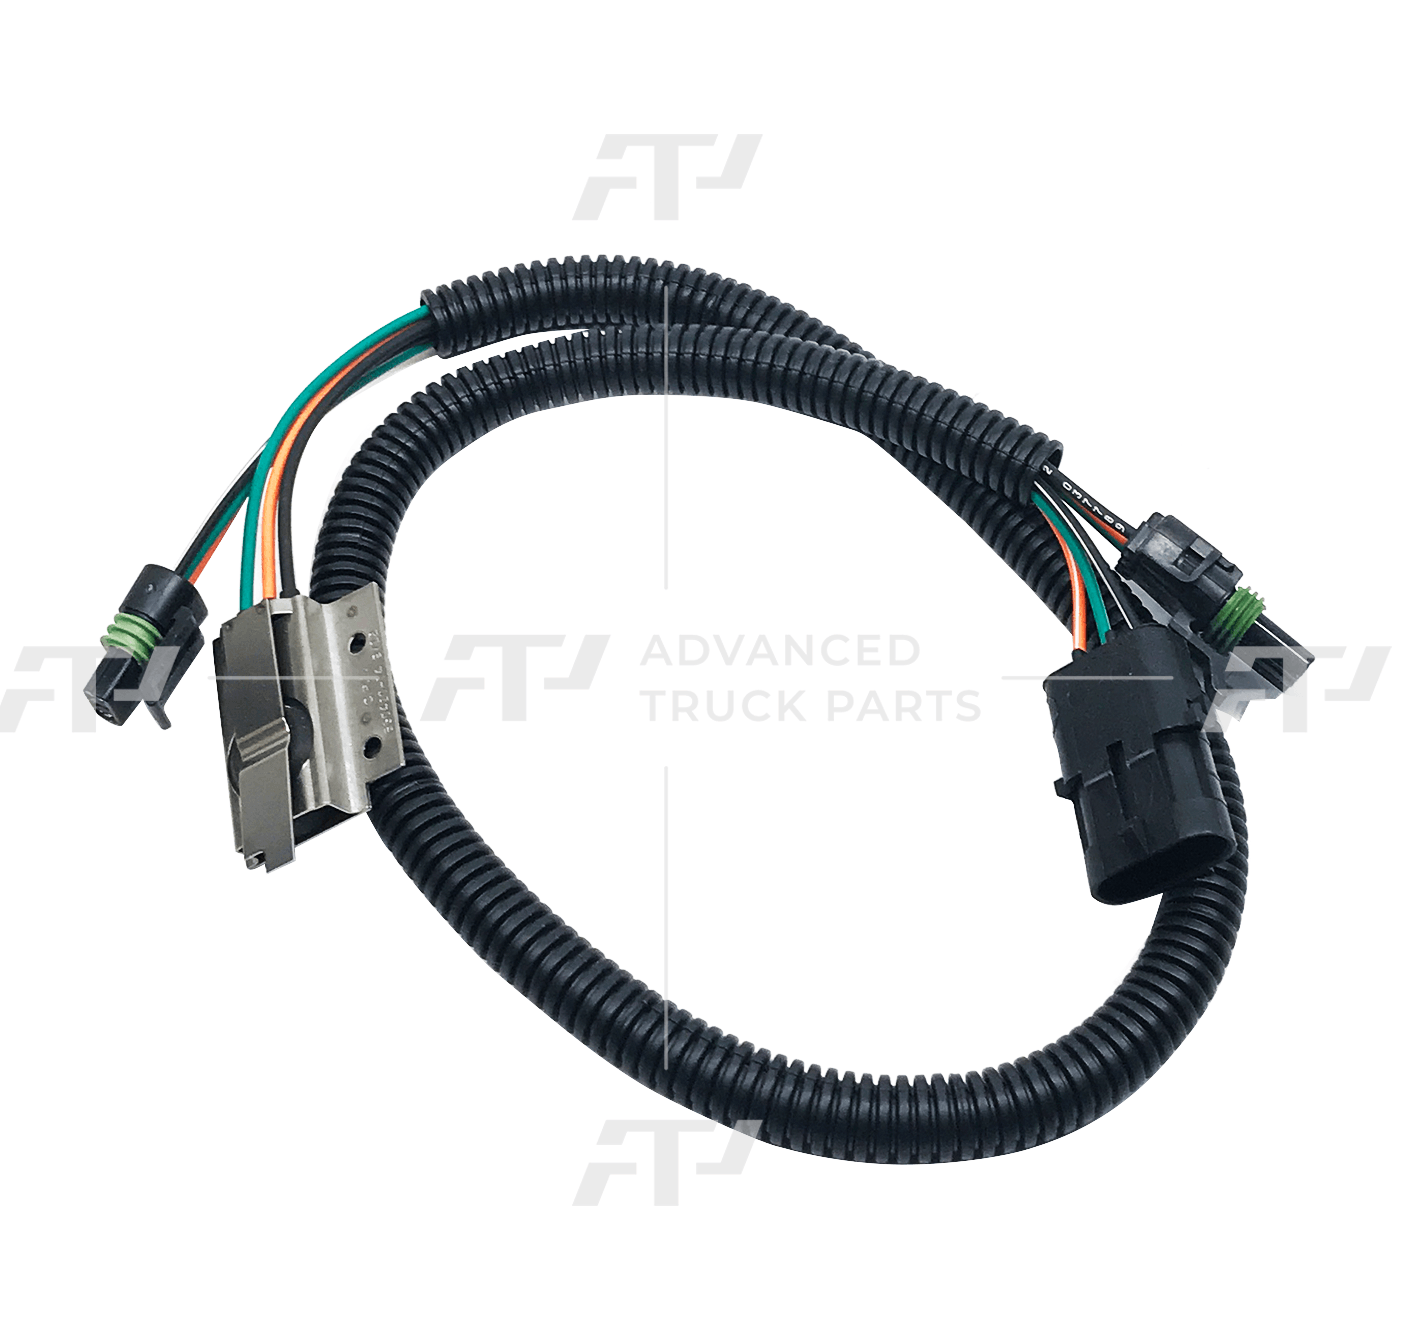 550420N Genuine Bendix® Cable Assembly - ADVANCED TRUCK PARTS